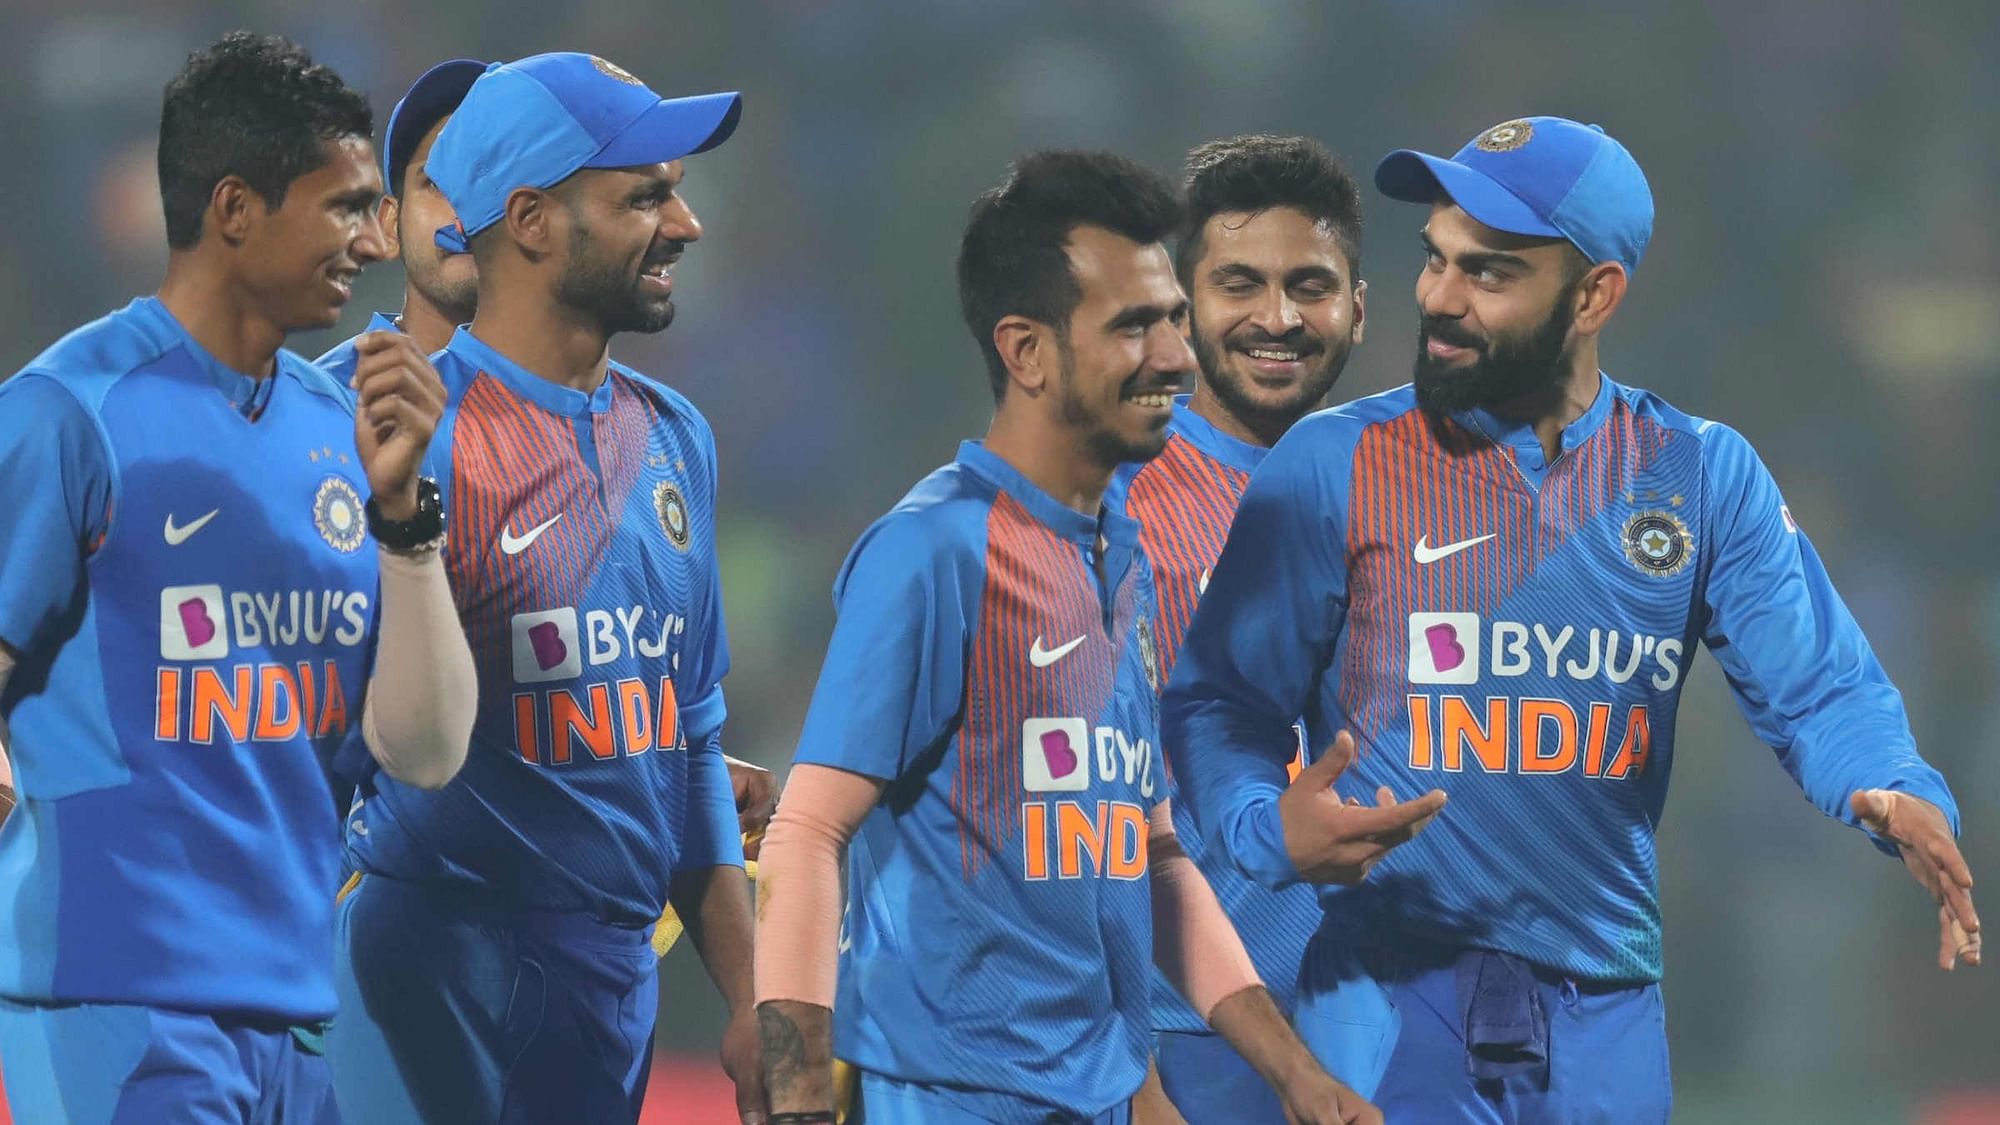 Live updates from the 3rd T20 international between India and Sri Lanka in Pune.&nbsp;